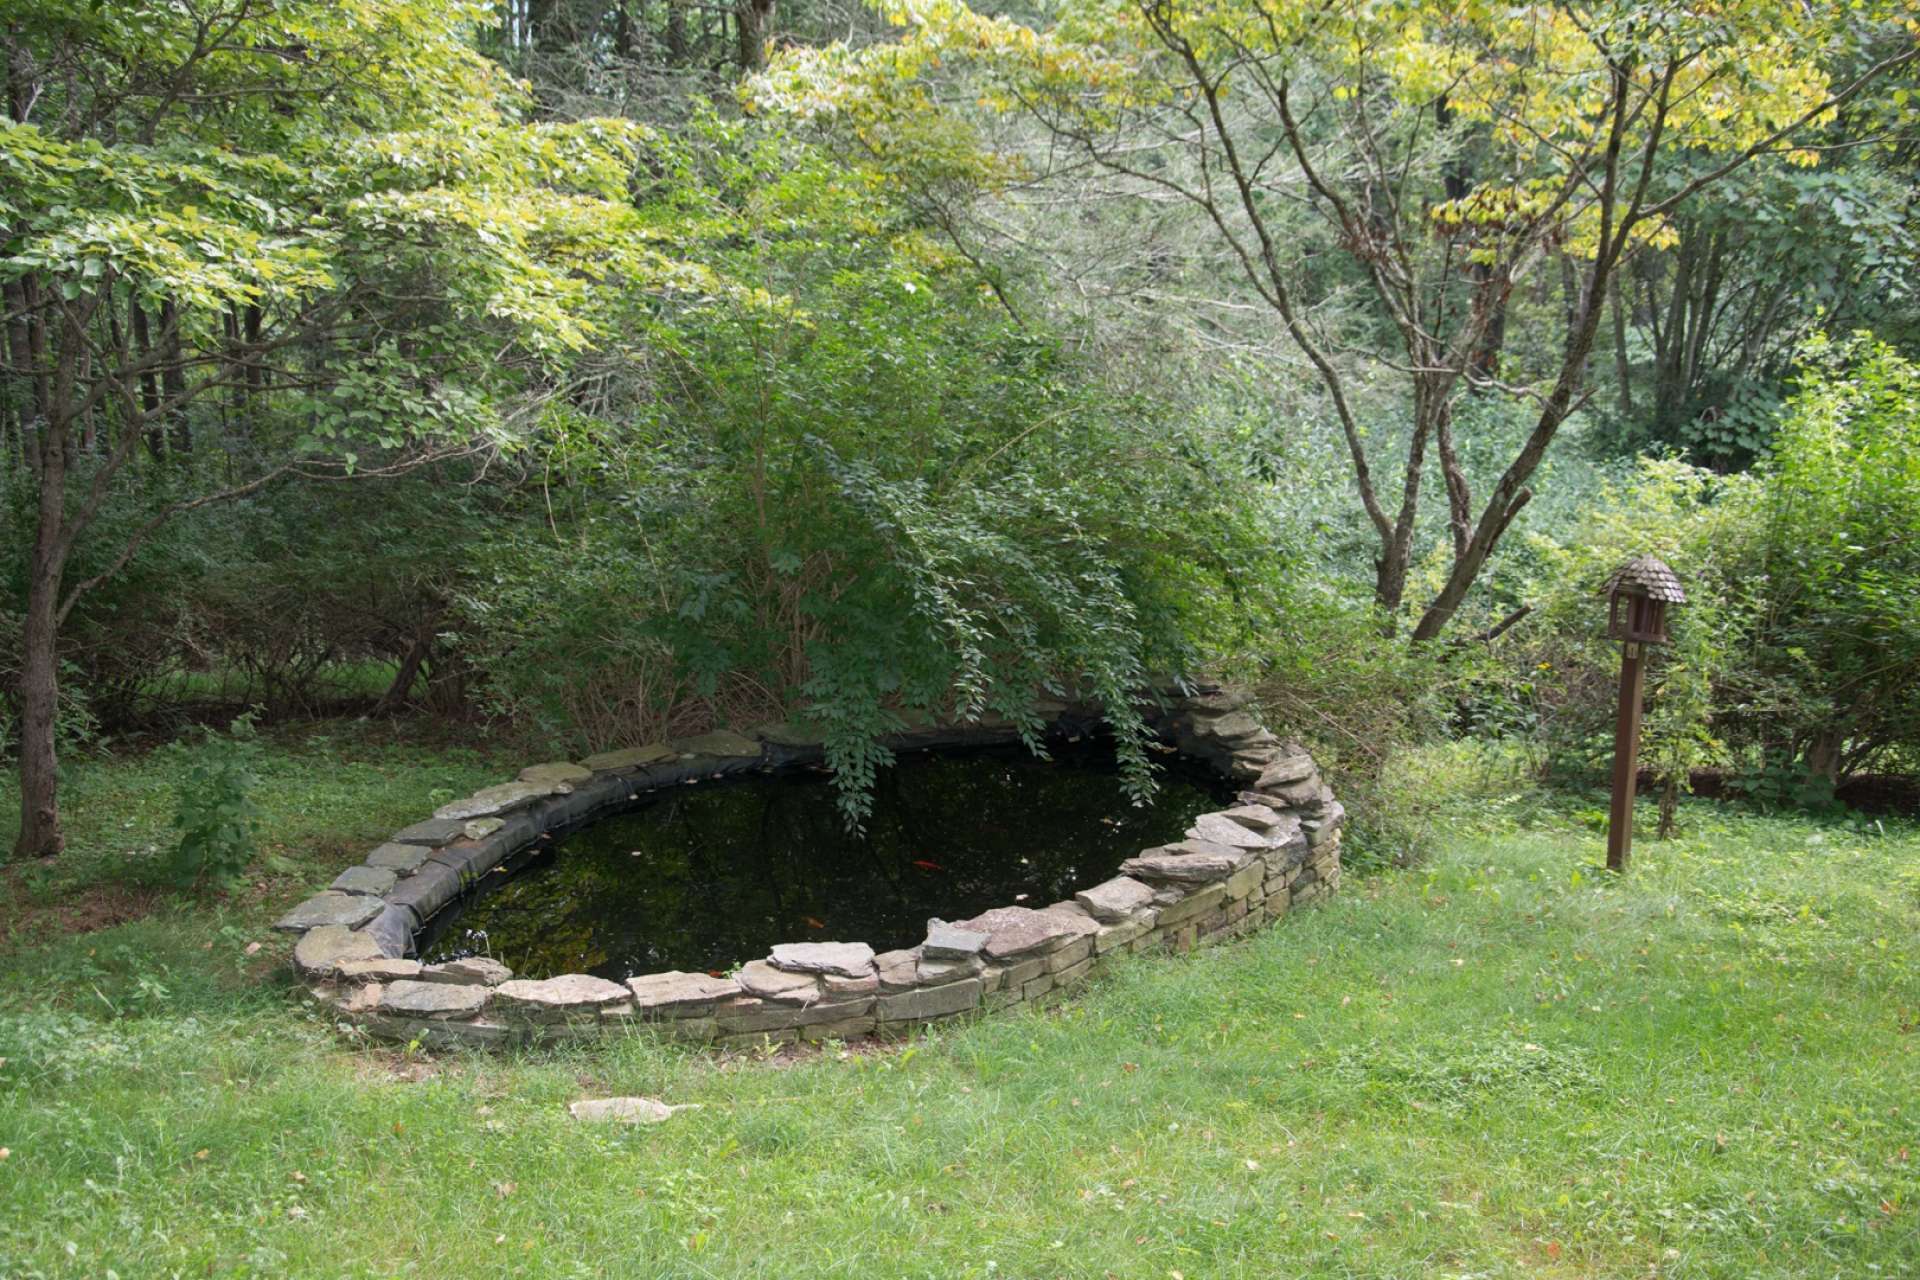 You will also love spending time at this small goldfish pond.